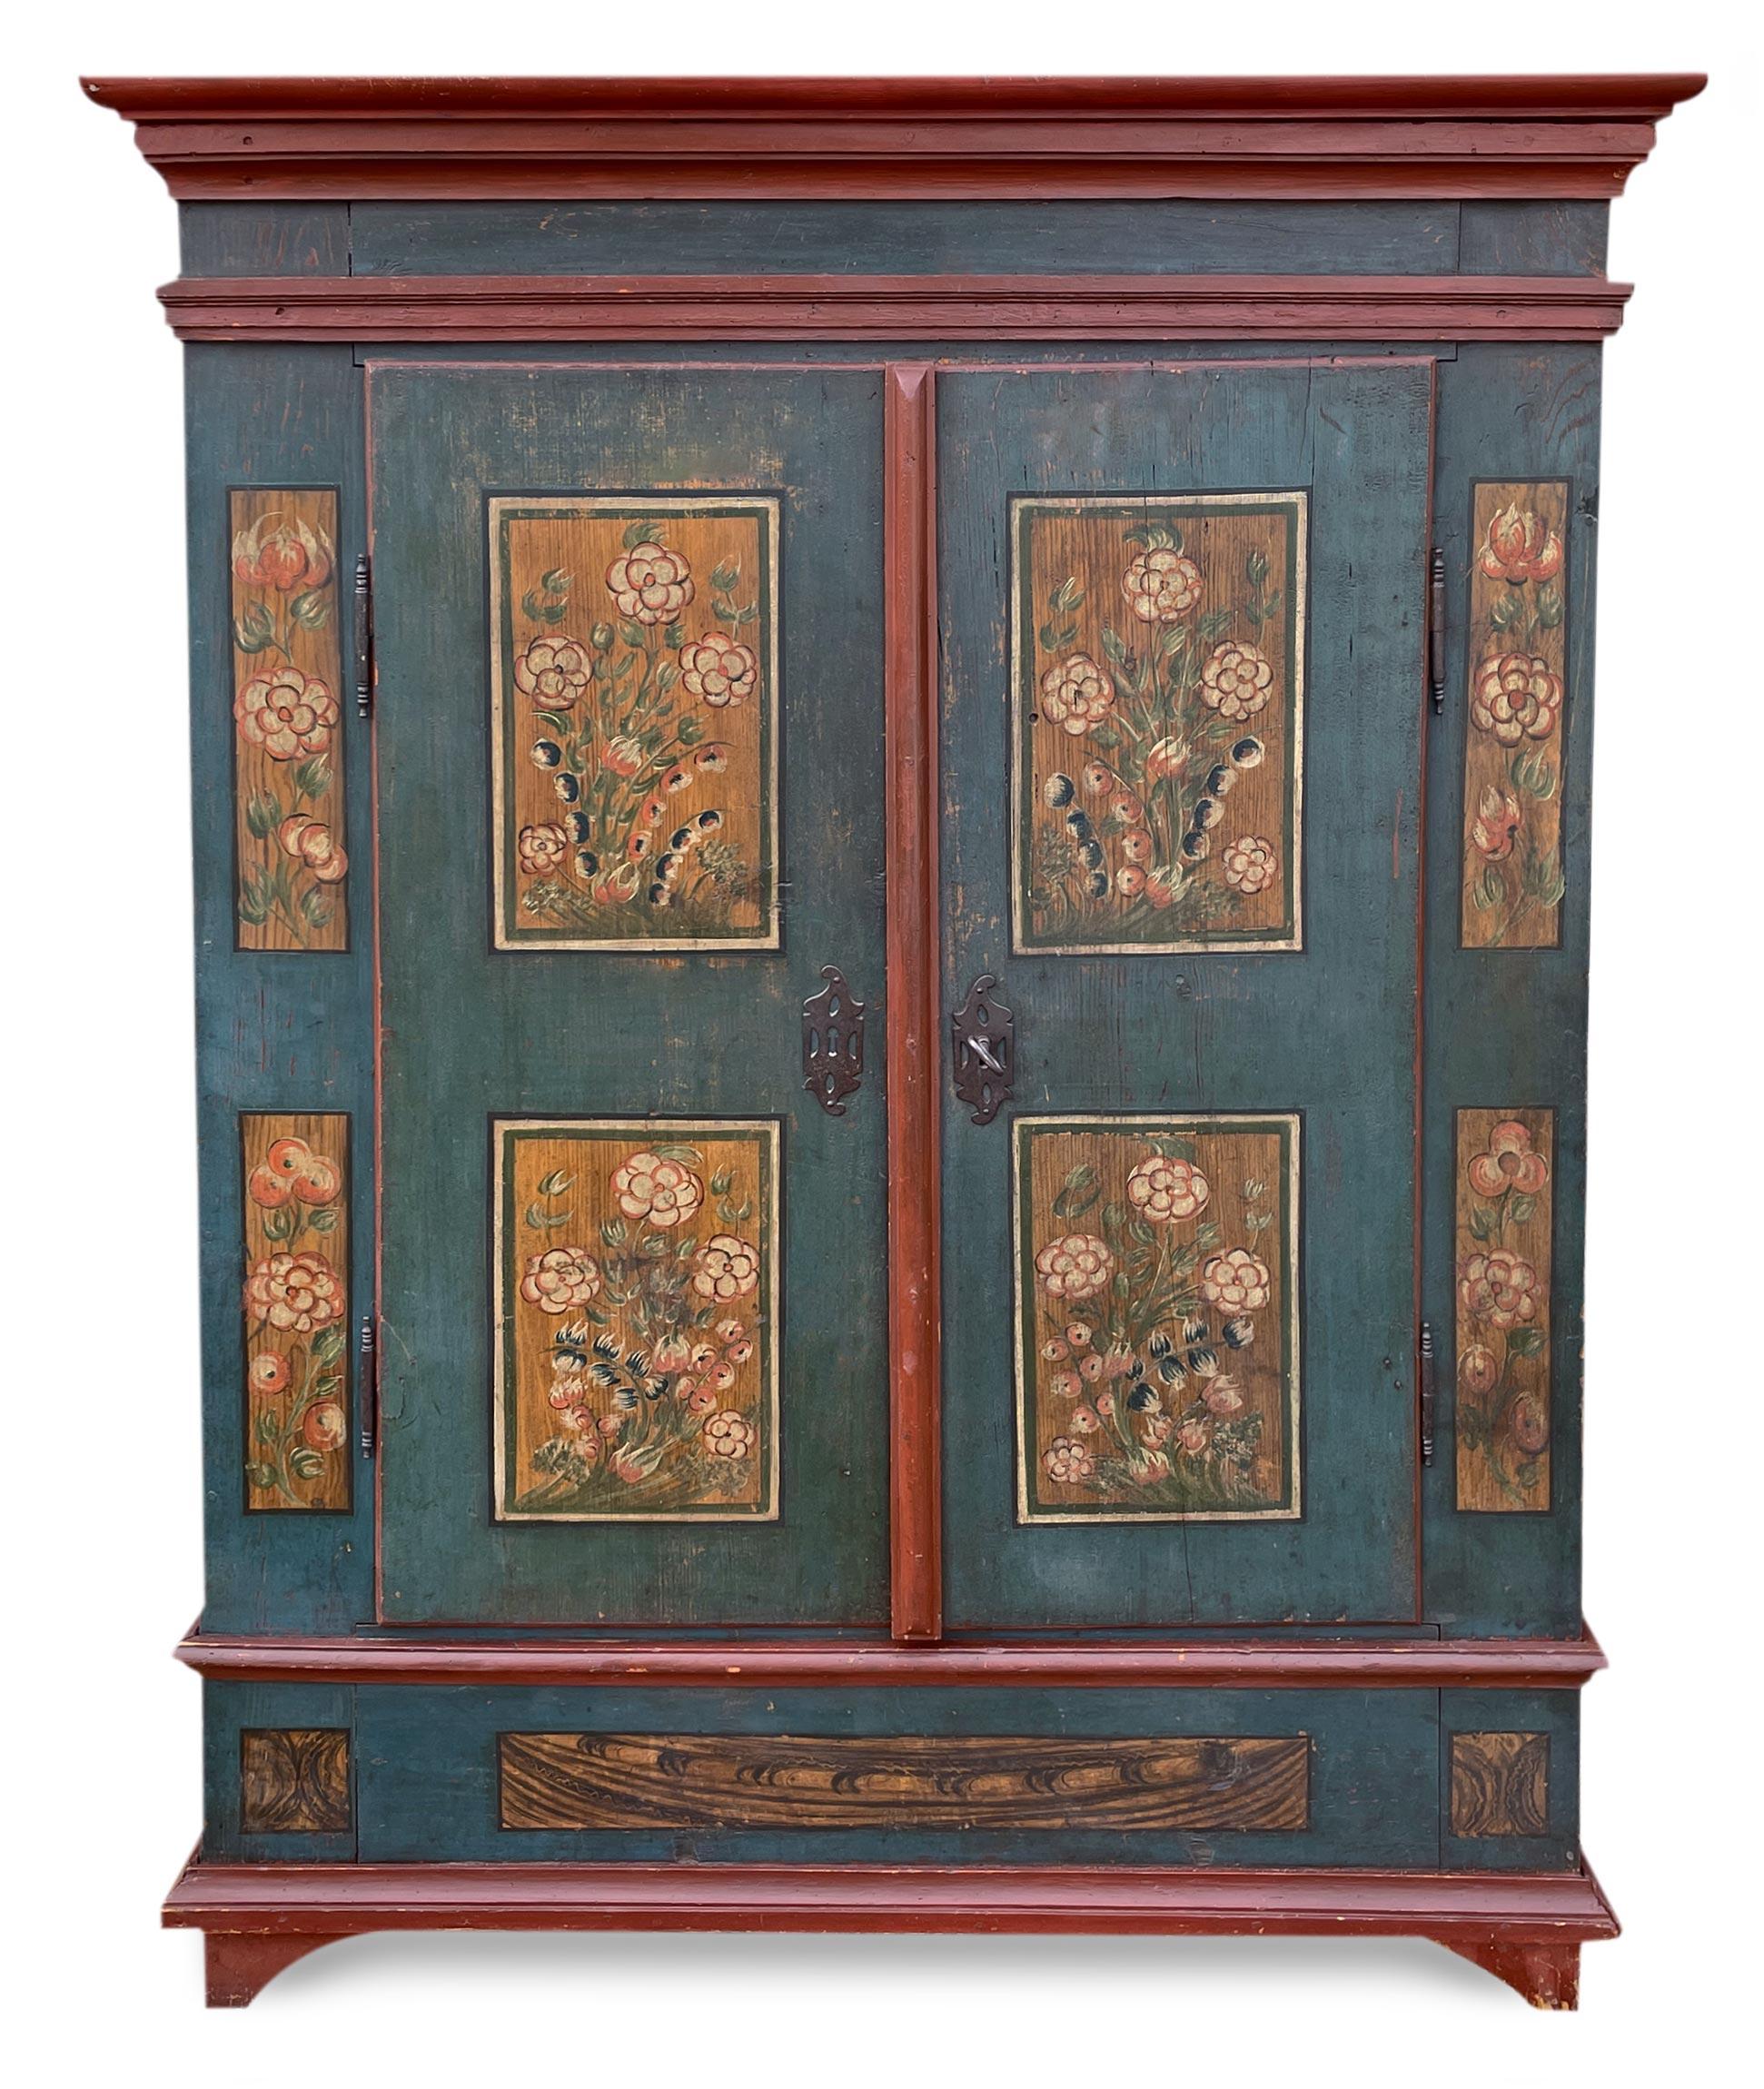 Painted Blue Tyrolean Wardrobe

H. 183 cm – L. 128 cm (140cm at the frames) – D. 49 cm (55 at the frames)

Beautiful Tyrolean wardrobe with two doors, entirely painted in deep blue, with brick red frames that create a pleasant chromatic contrast. On